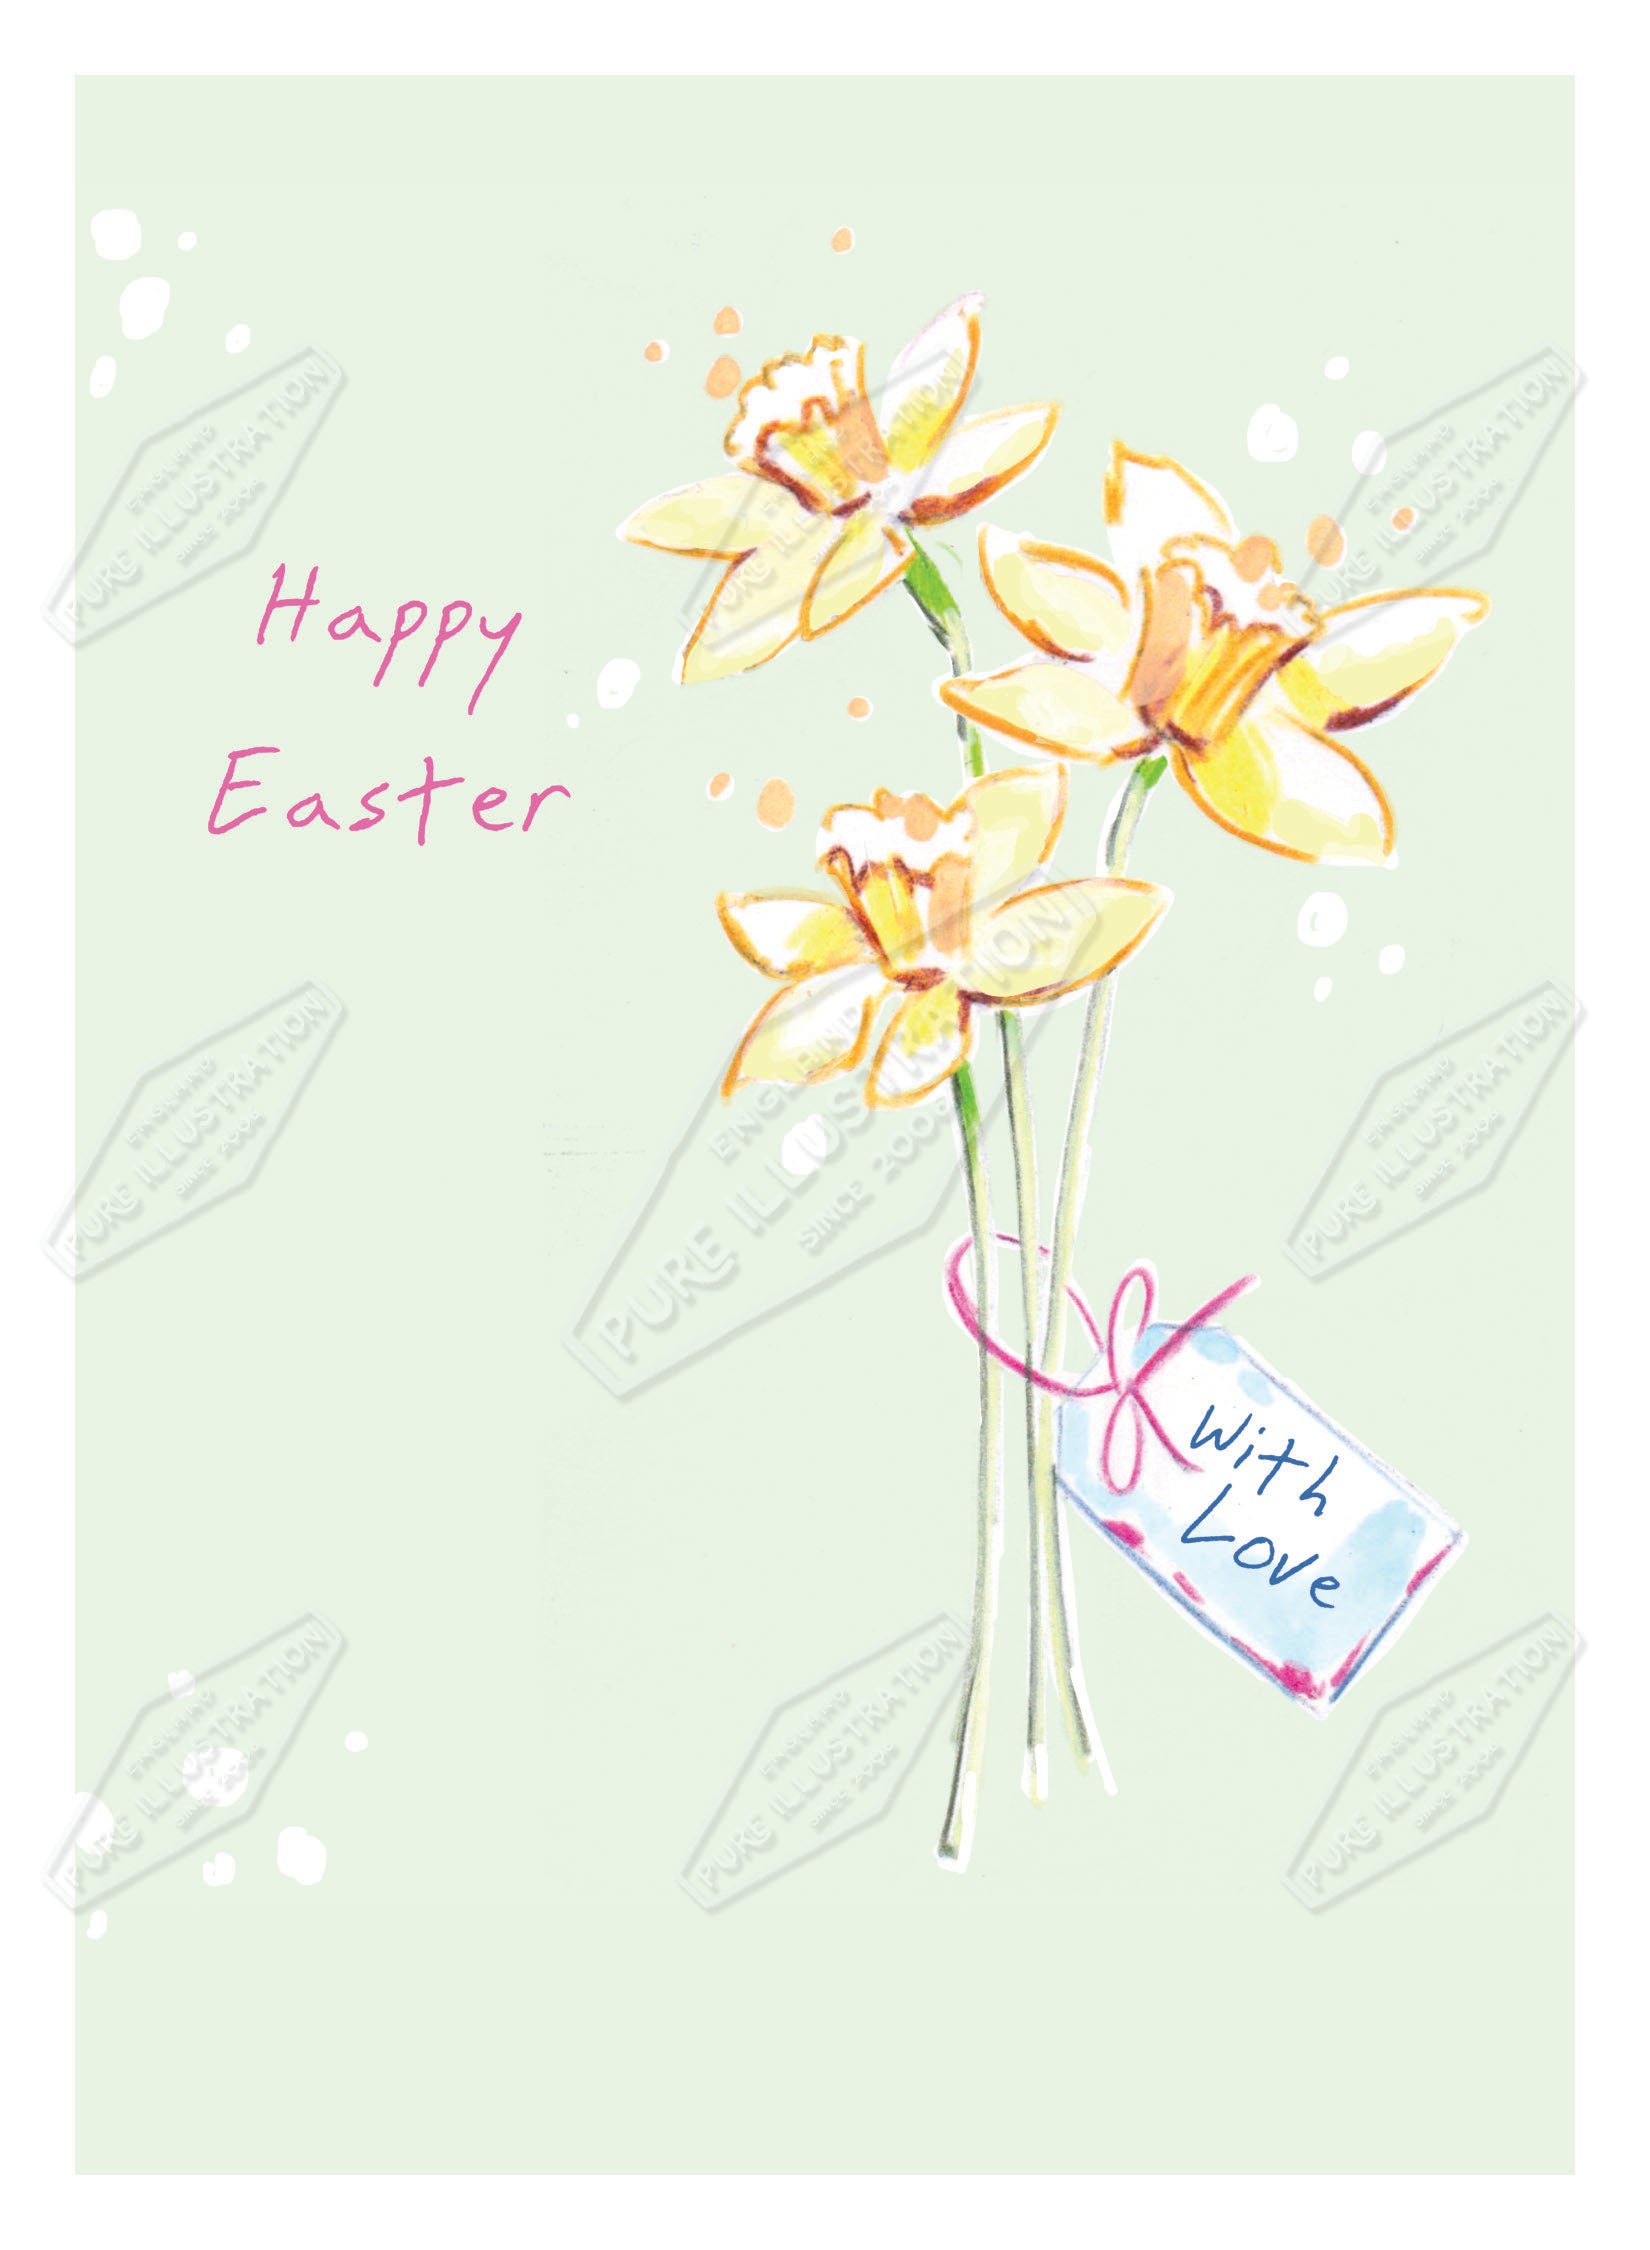 00035750AMA - Ally Marie is represented by Pure Art Licensing Agency - Easter Greeting Card Design